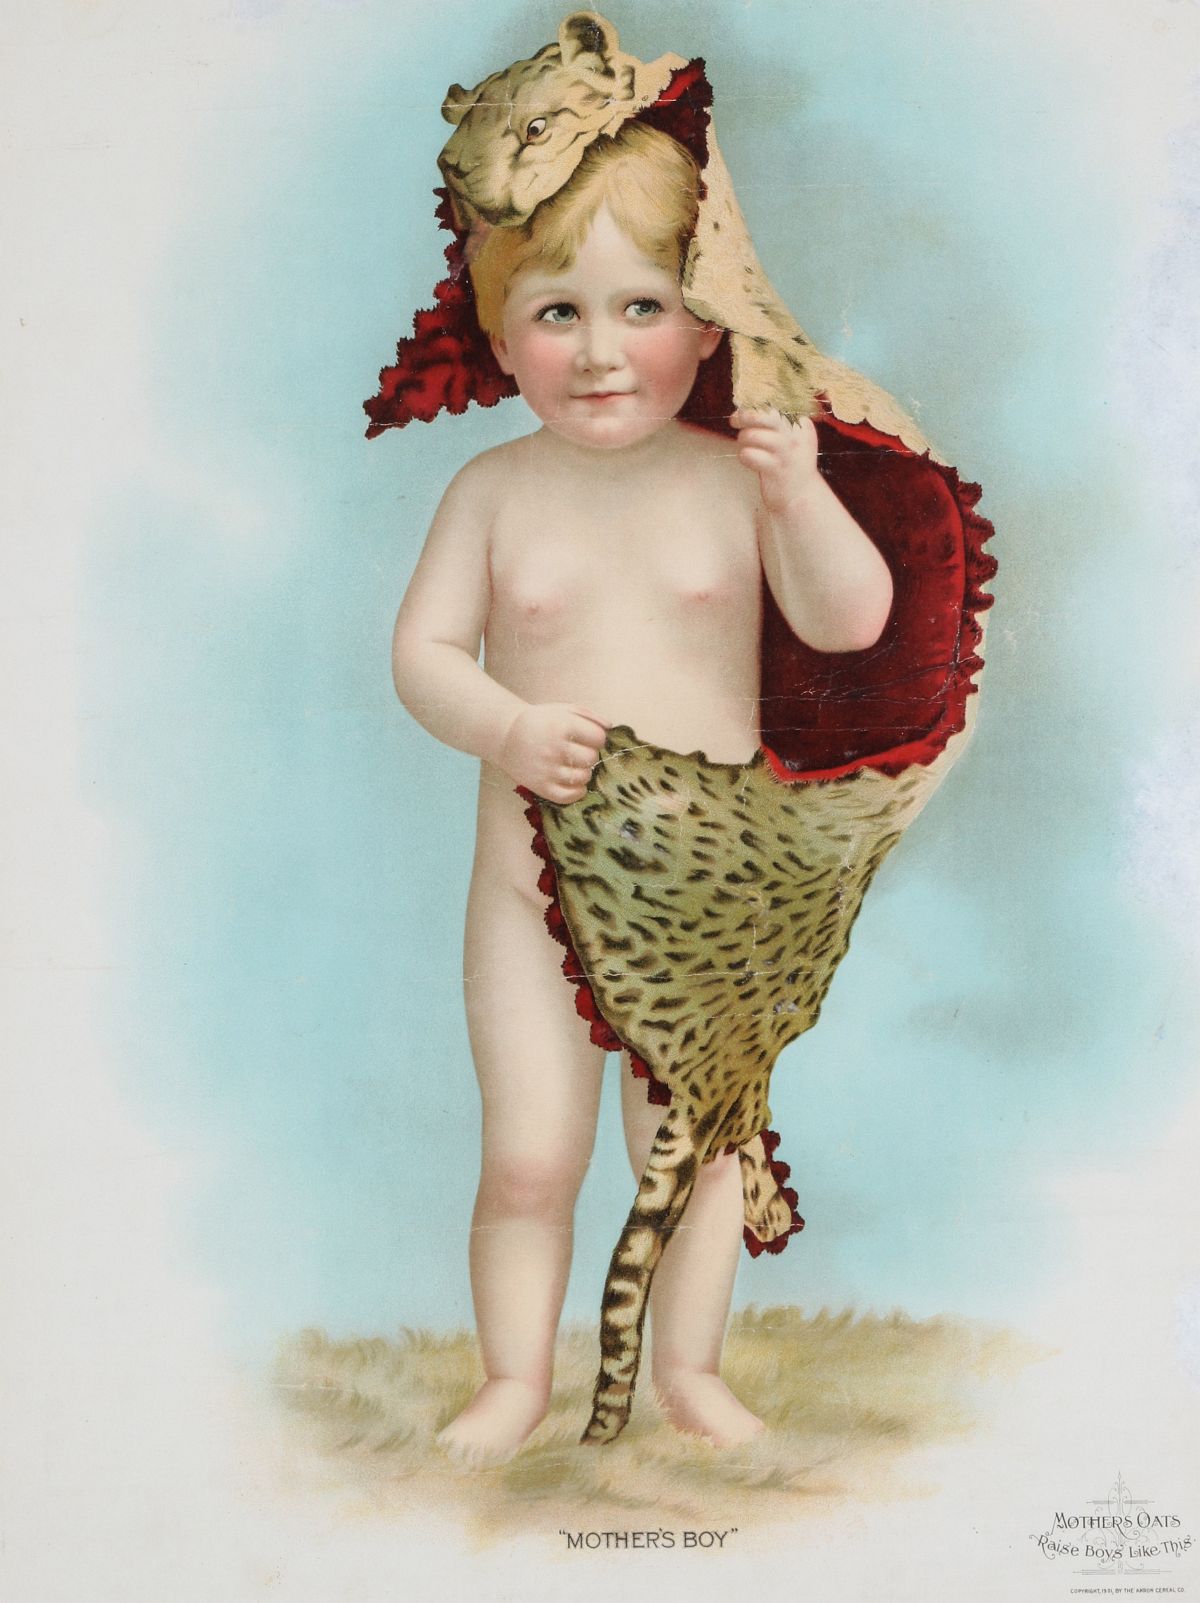 A MOTHER'S OATS ADVERTISING POSTER CIRCA 1911